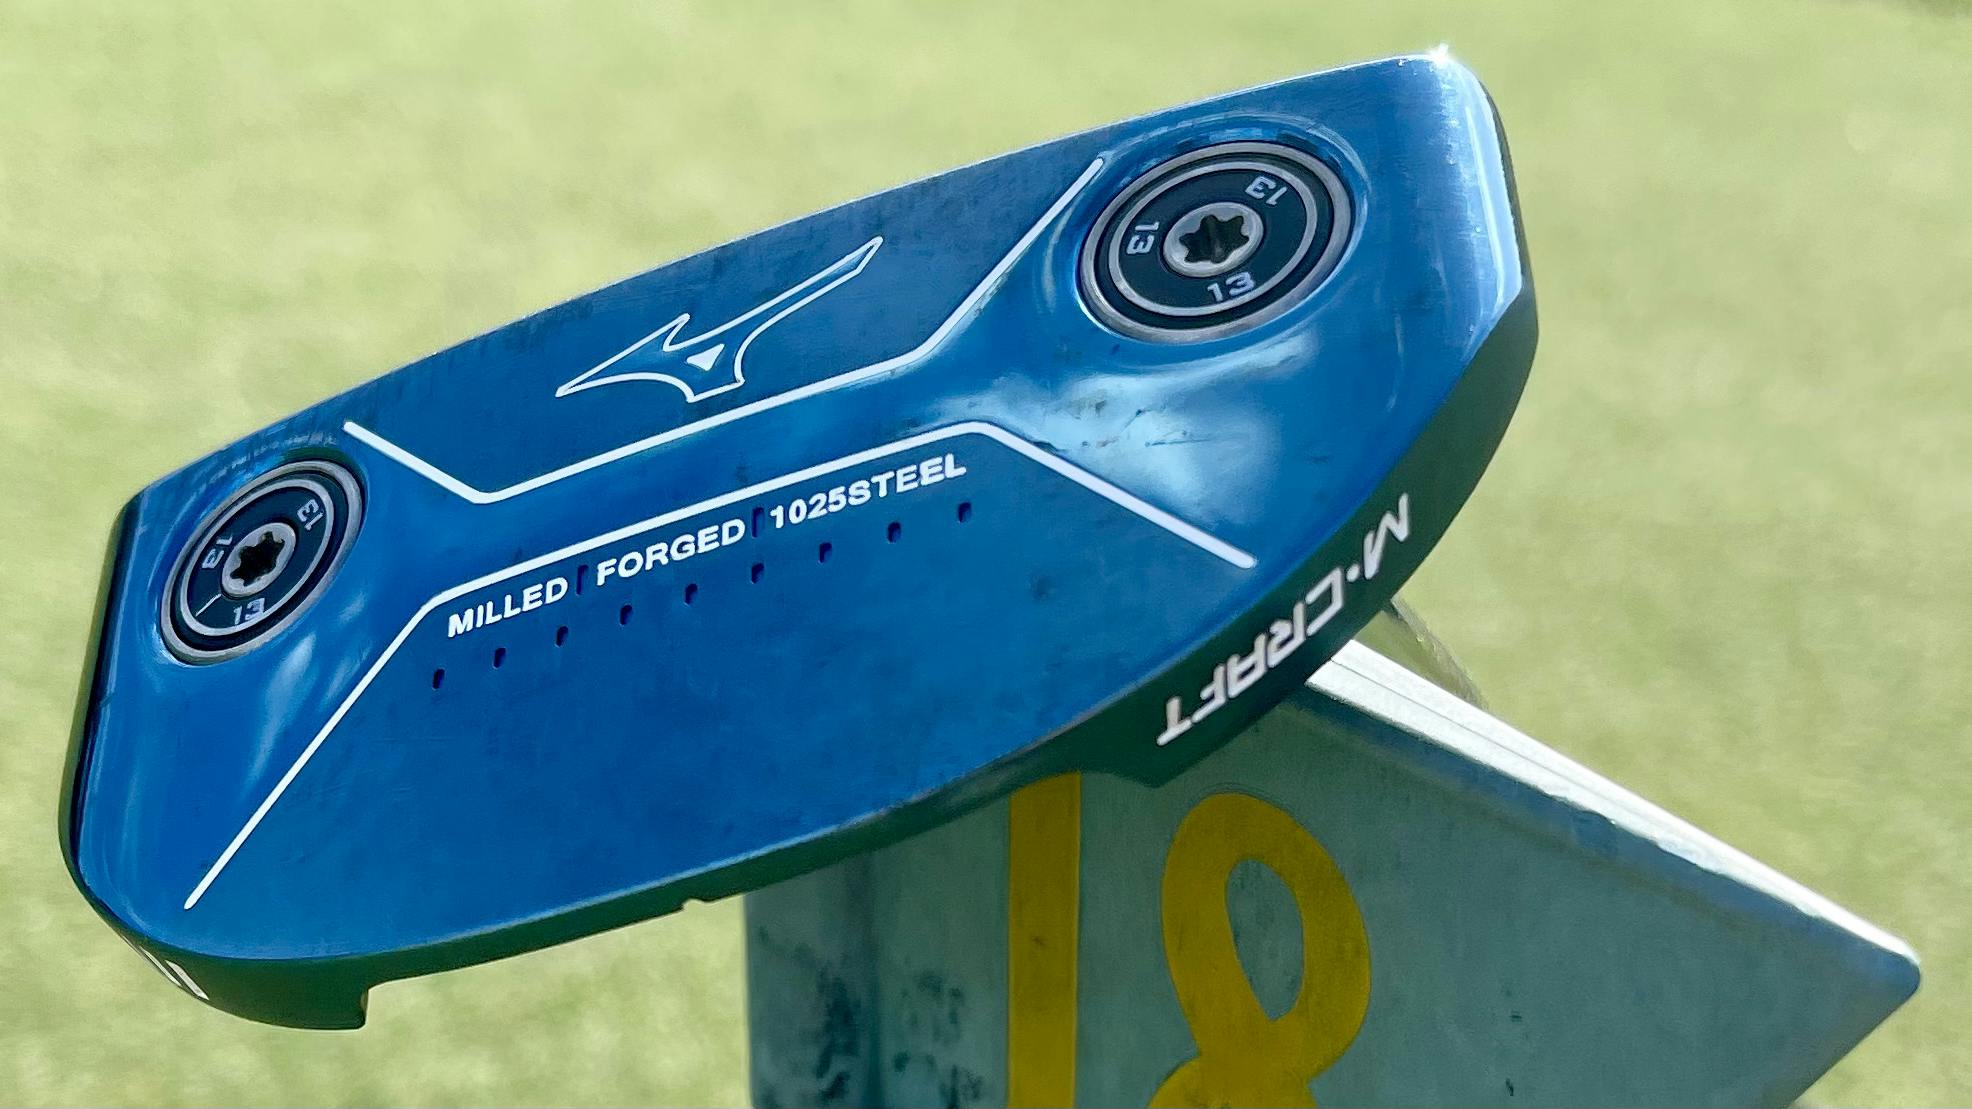 Close up of the The Mizuno M.Craft Type III Putter.